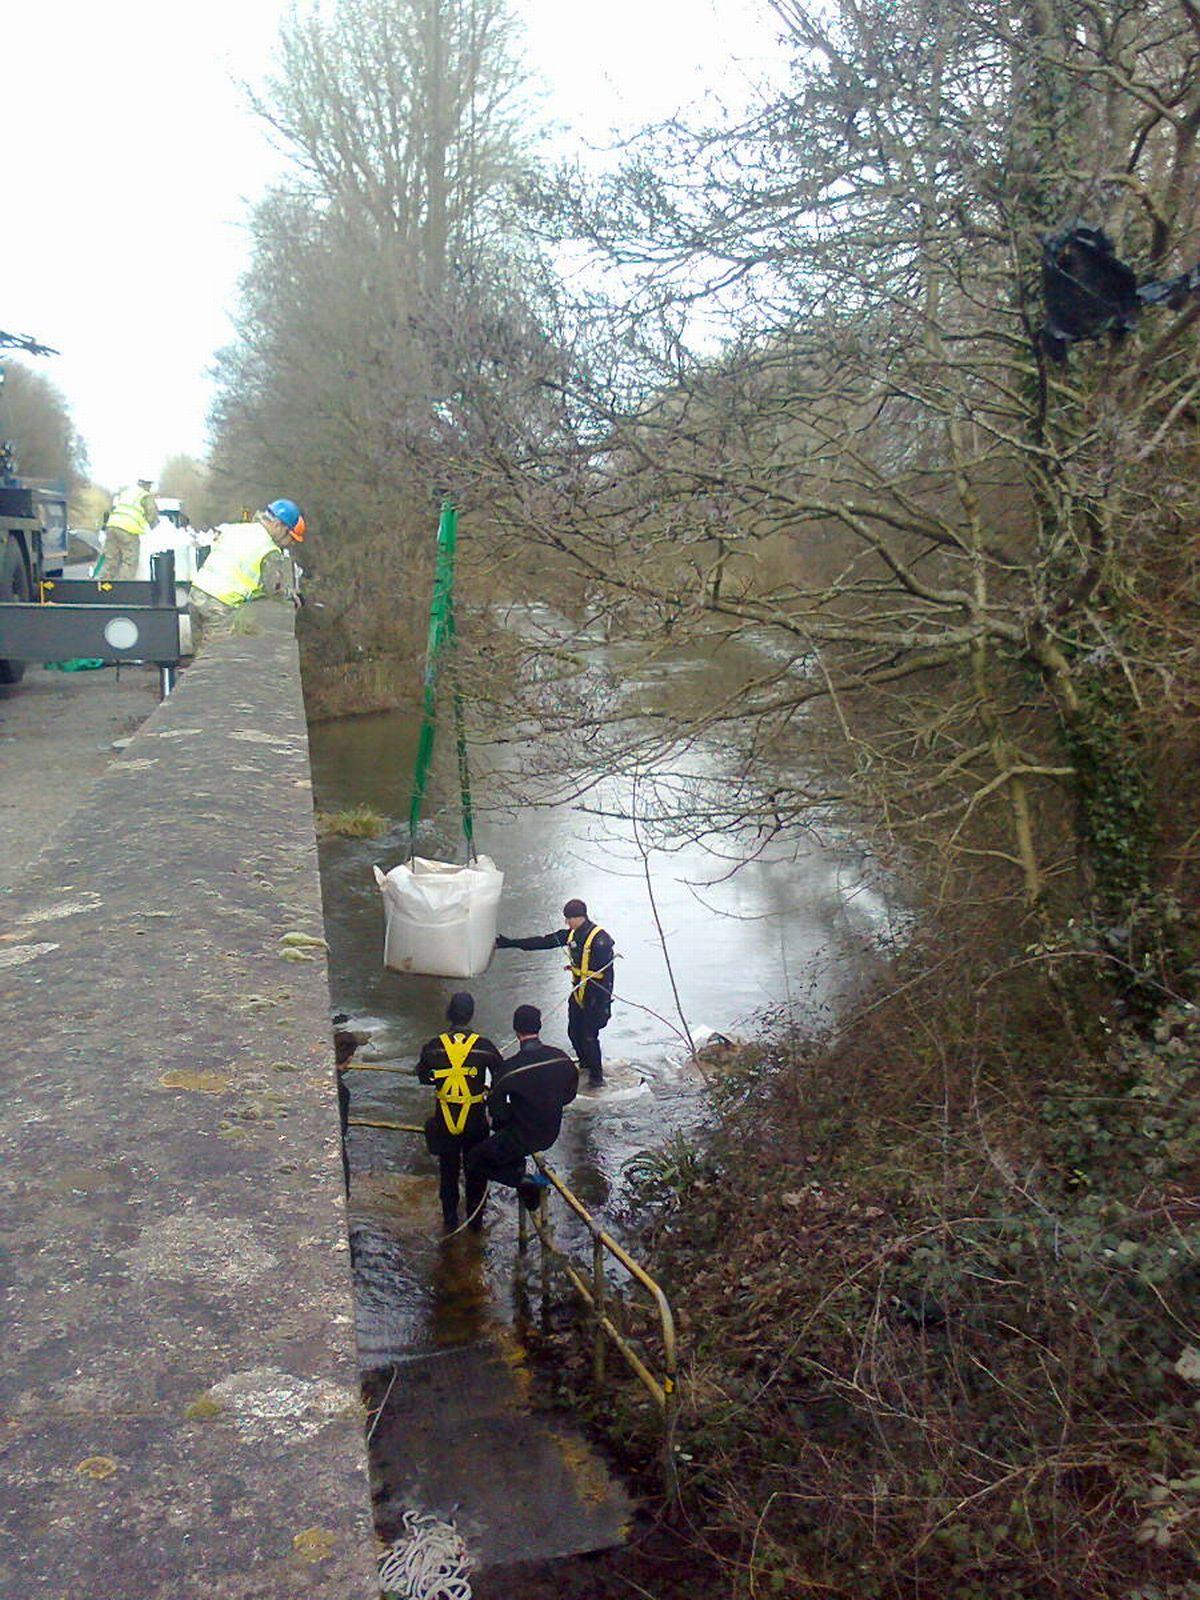 Royal Engineers unloading more than 100 bags into the Itchen at Kings Worthy